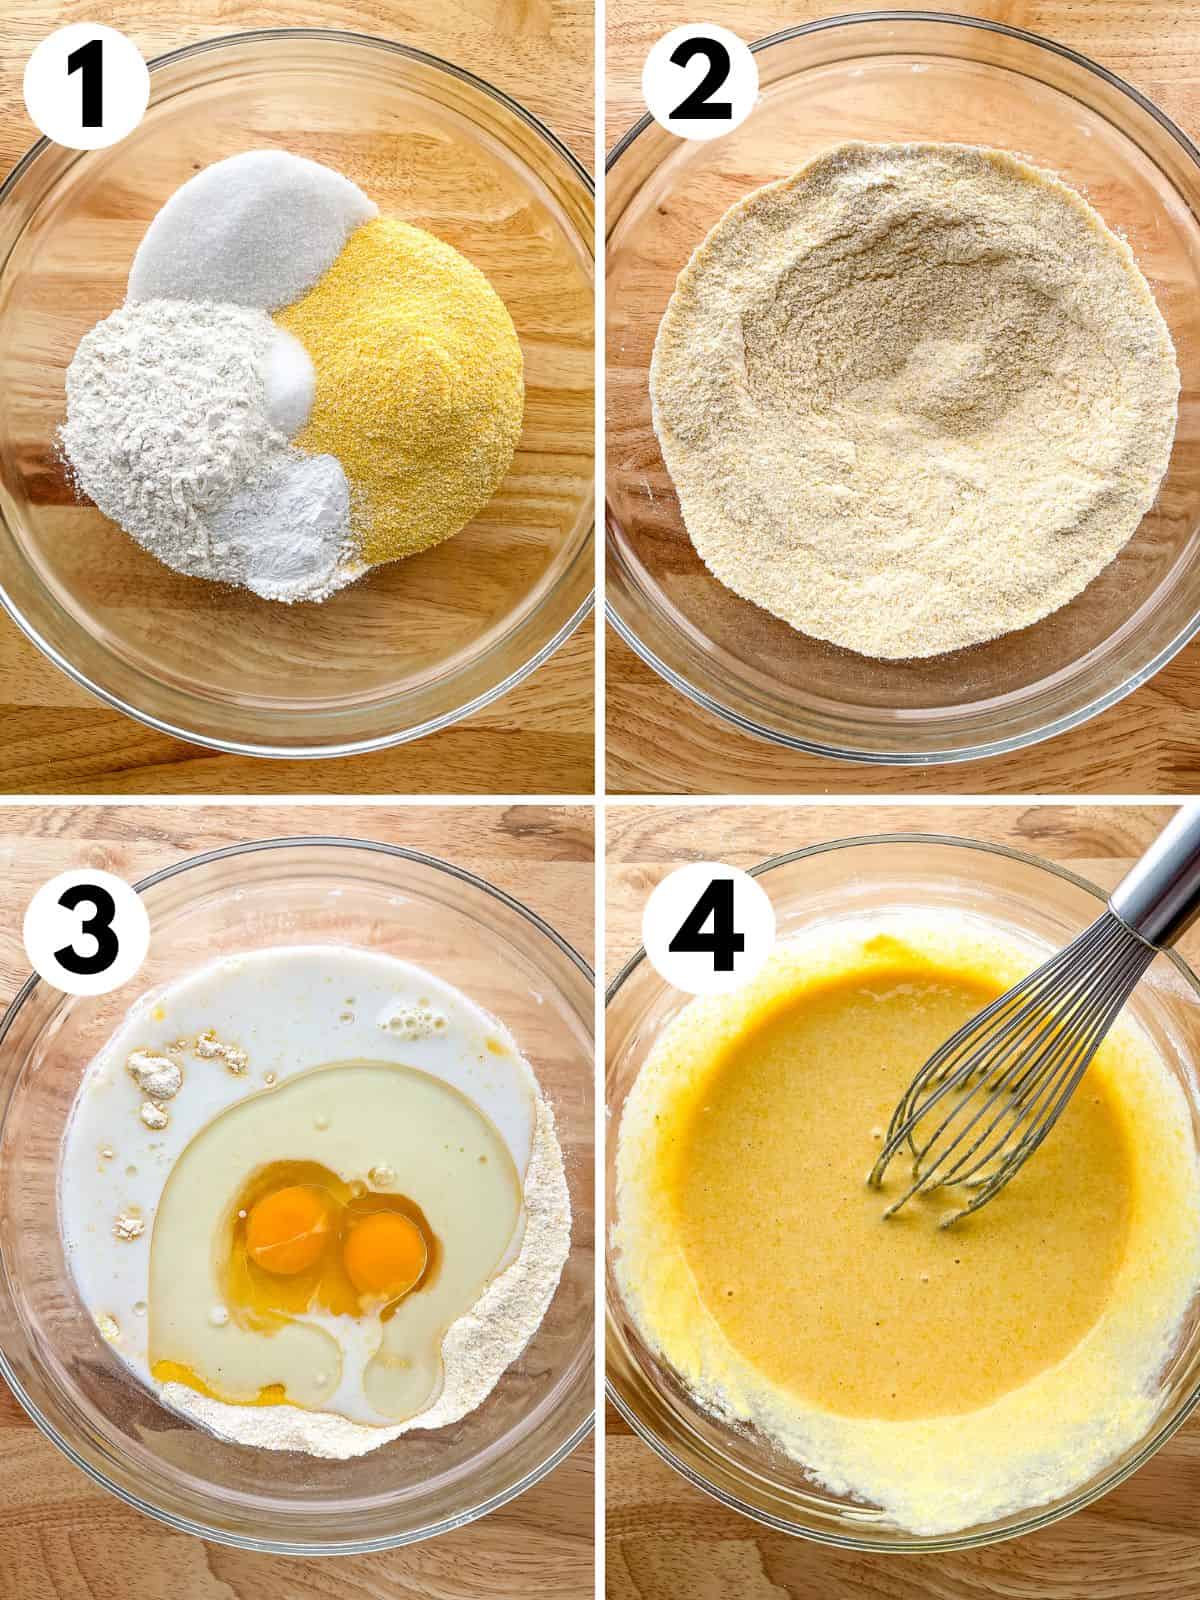 The four steps for mixing skillet cornbread batter. 1. Dry ingredients in the bowl. 2. Dry ingredients whisked. 3. Adding wet ingredients. 4. Skillet cornbread batter.